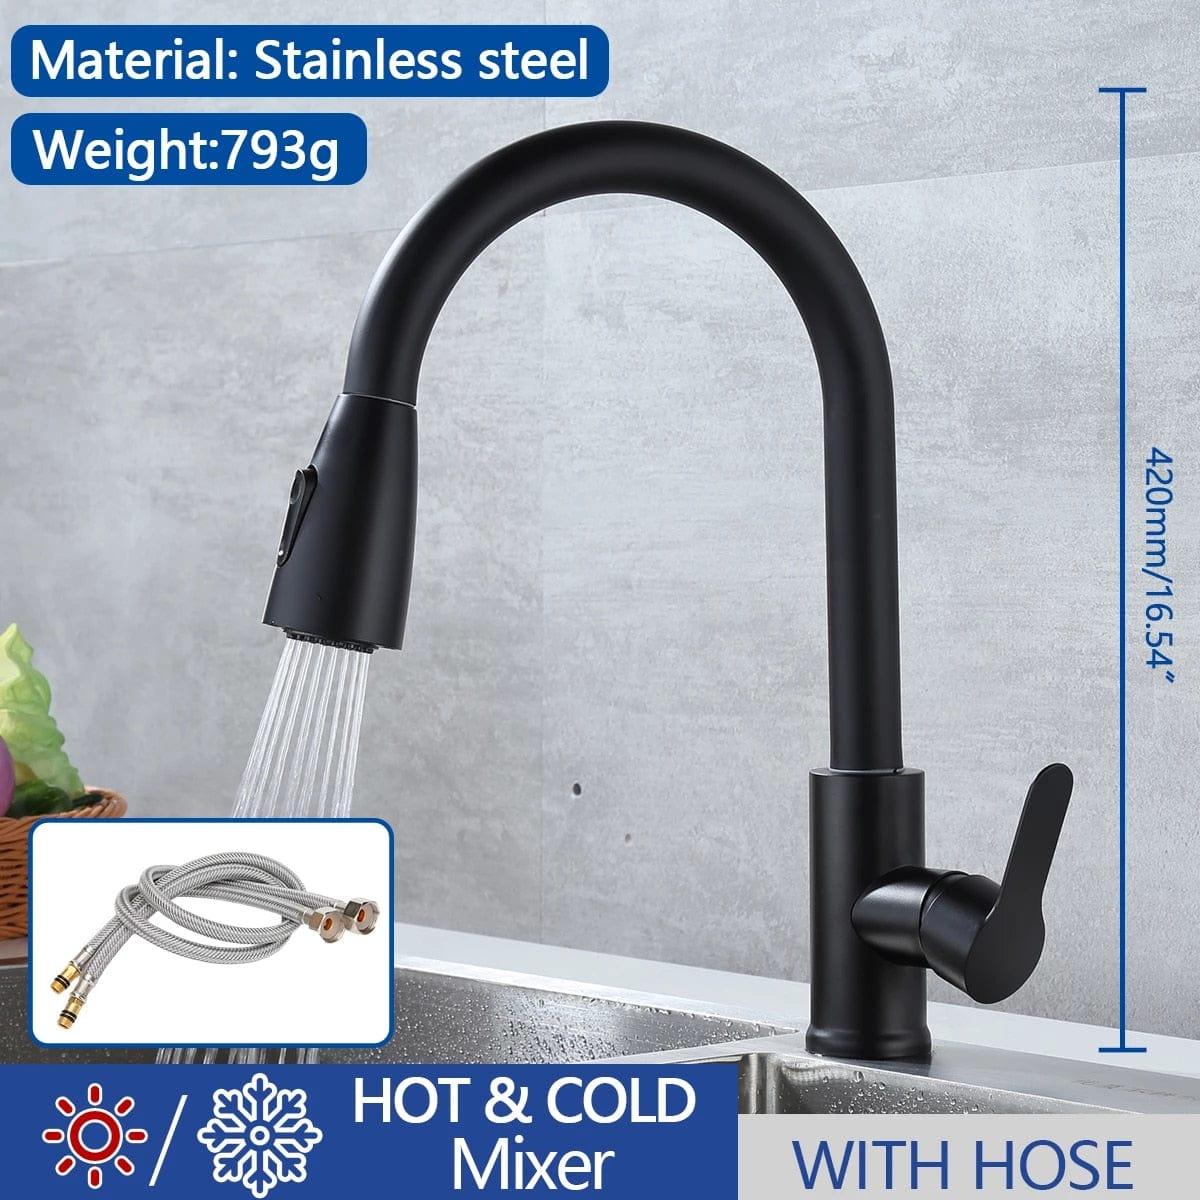 Shop 0 CP11 add Hose 1 Kitchen Faucet Stainless Steel Faucets Hot Cold Water Mixer Tap 2 Function Stream Sprayer Single Handle Pull Out Kitchen Taps Mademoiselle Home Decor